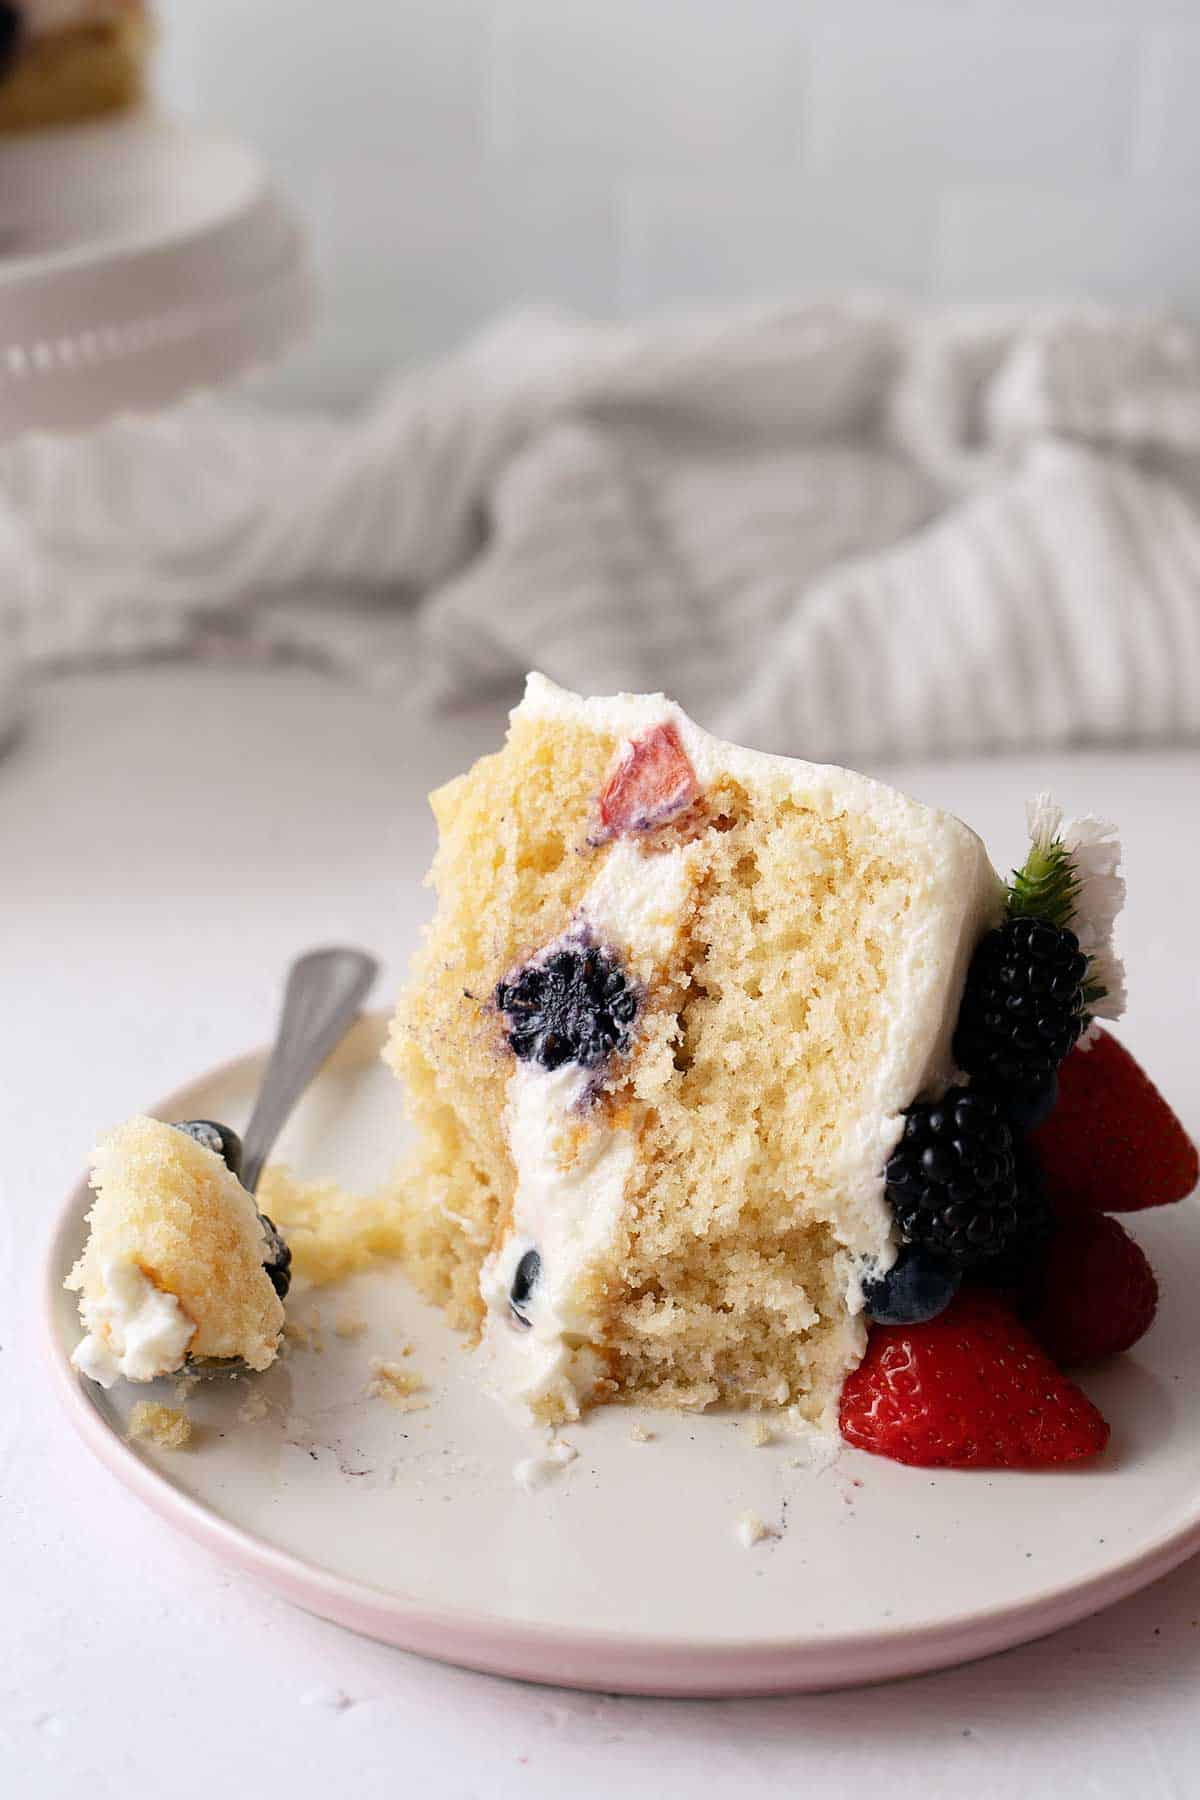 Half eaten portion of berry cake with white frosting